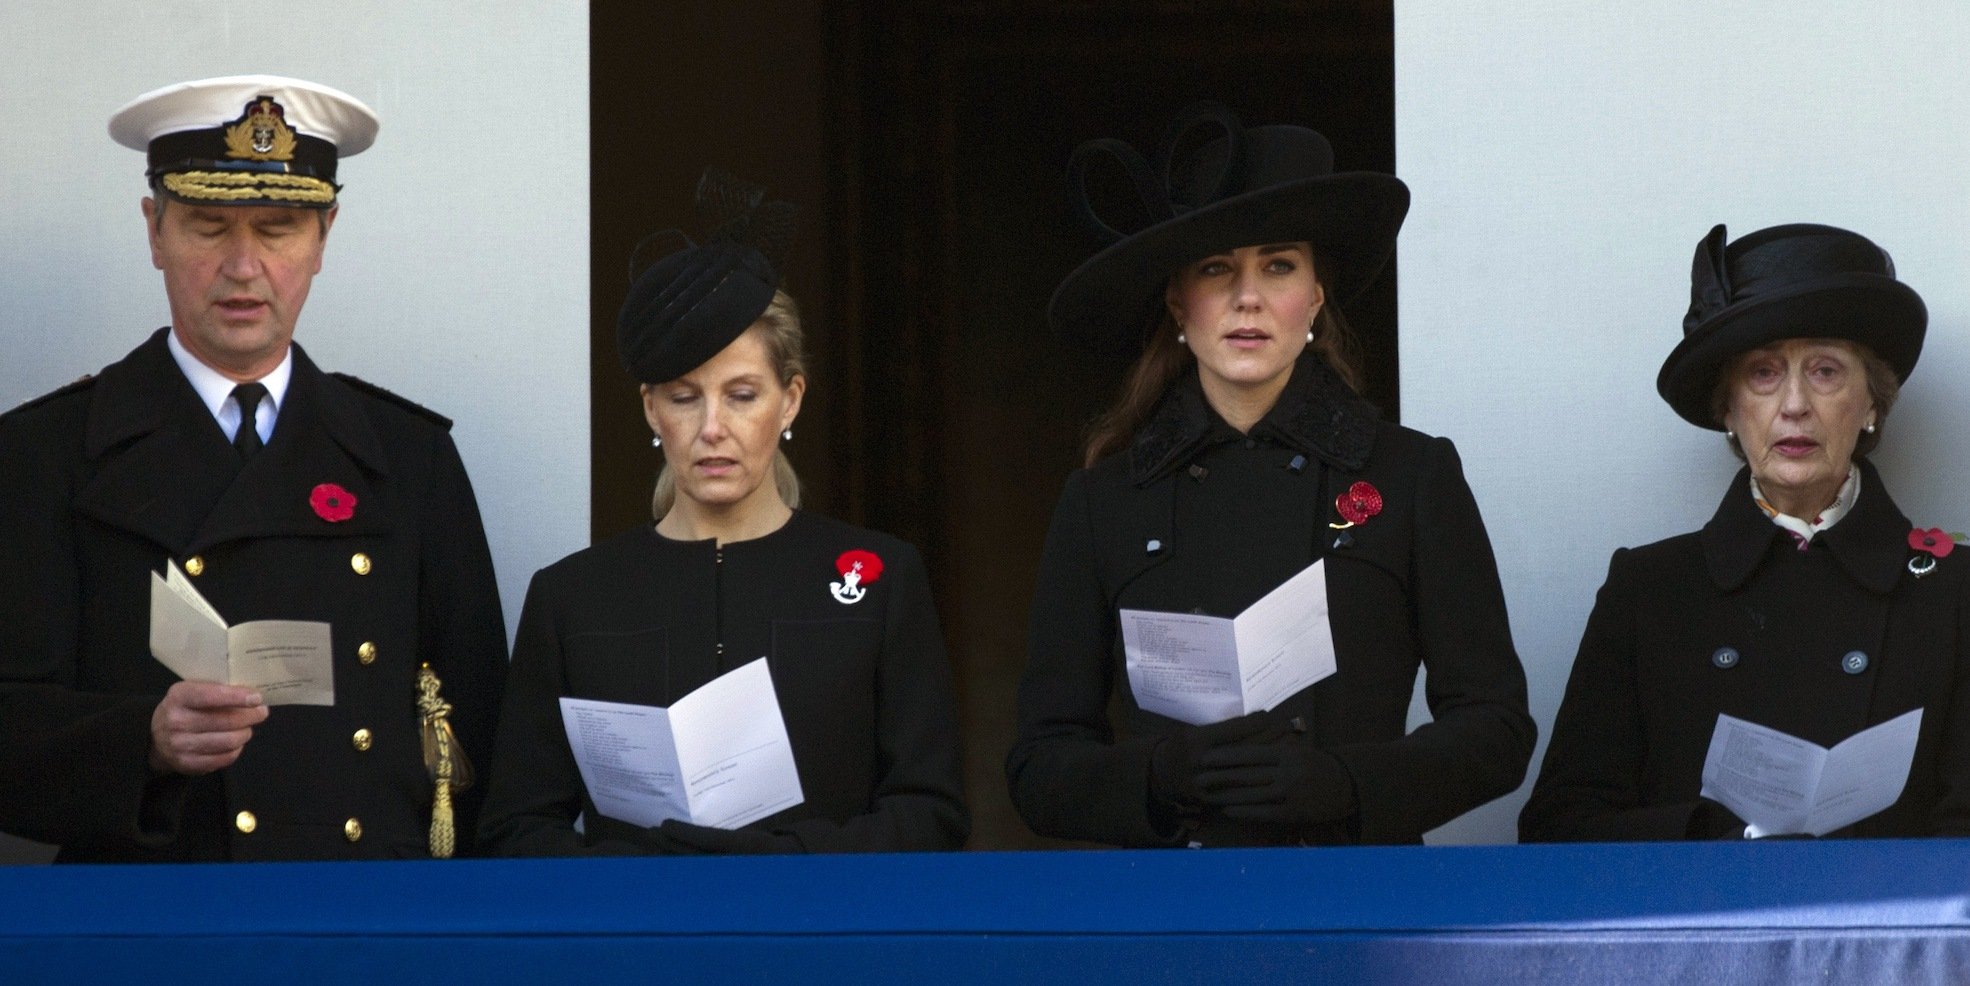 An Inside Look At The Surprising Duties Of Royal Family Ladies In Waiting